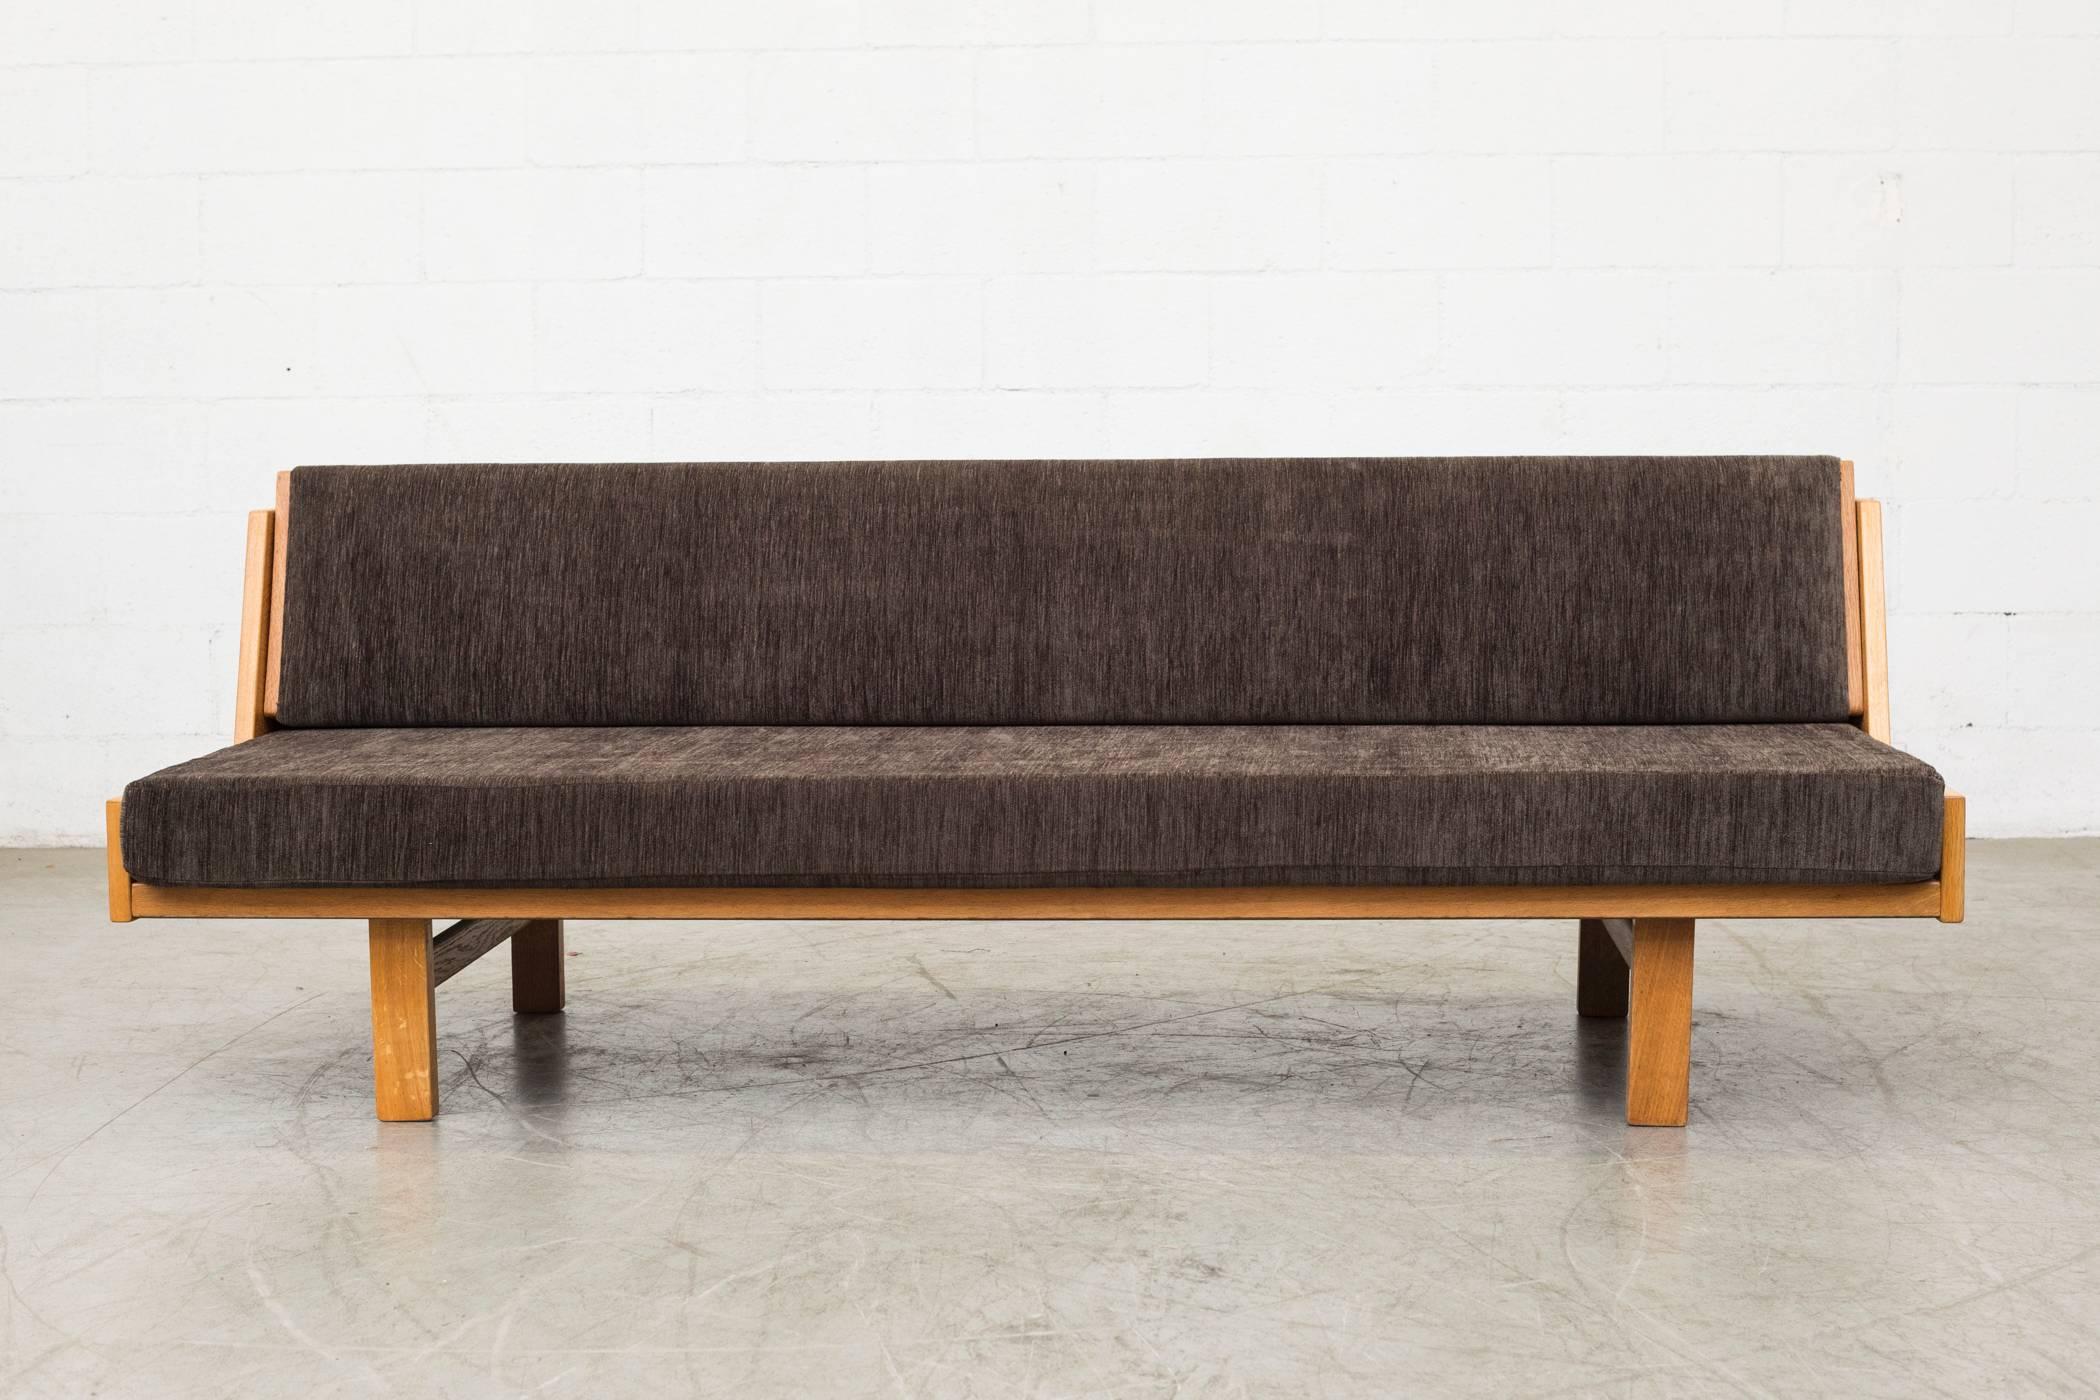 Hans Wegner model GE 258 Daybed by GETAMA in Denmark. Beechwood frame with charcoal fabric. The backrest is raised to reveal a sleeper. Good original condition. 

Measures: 81 x 36.5 x 16/29.5/37.5.